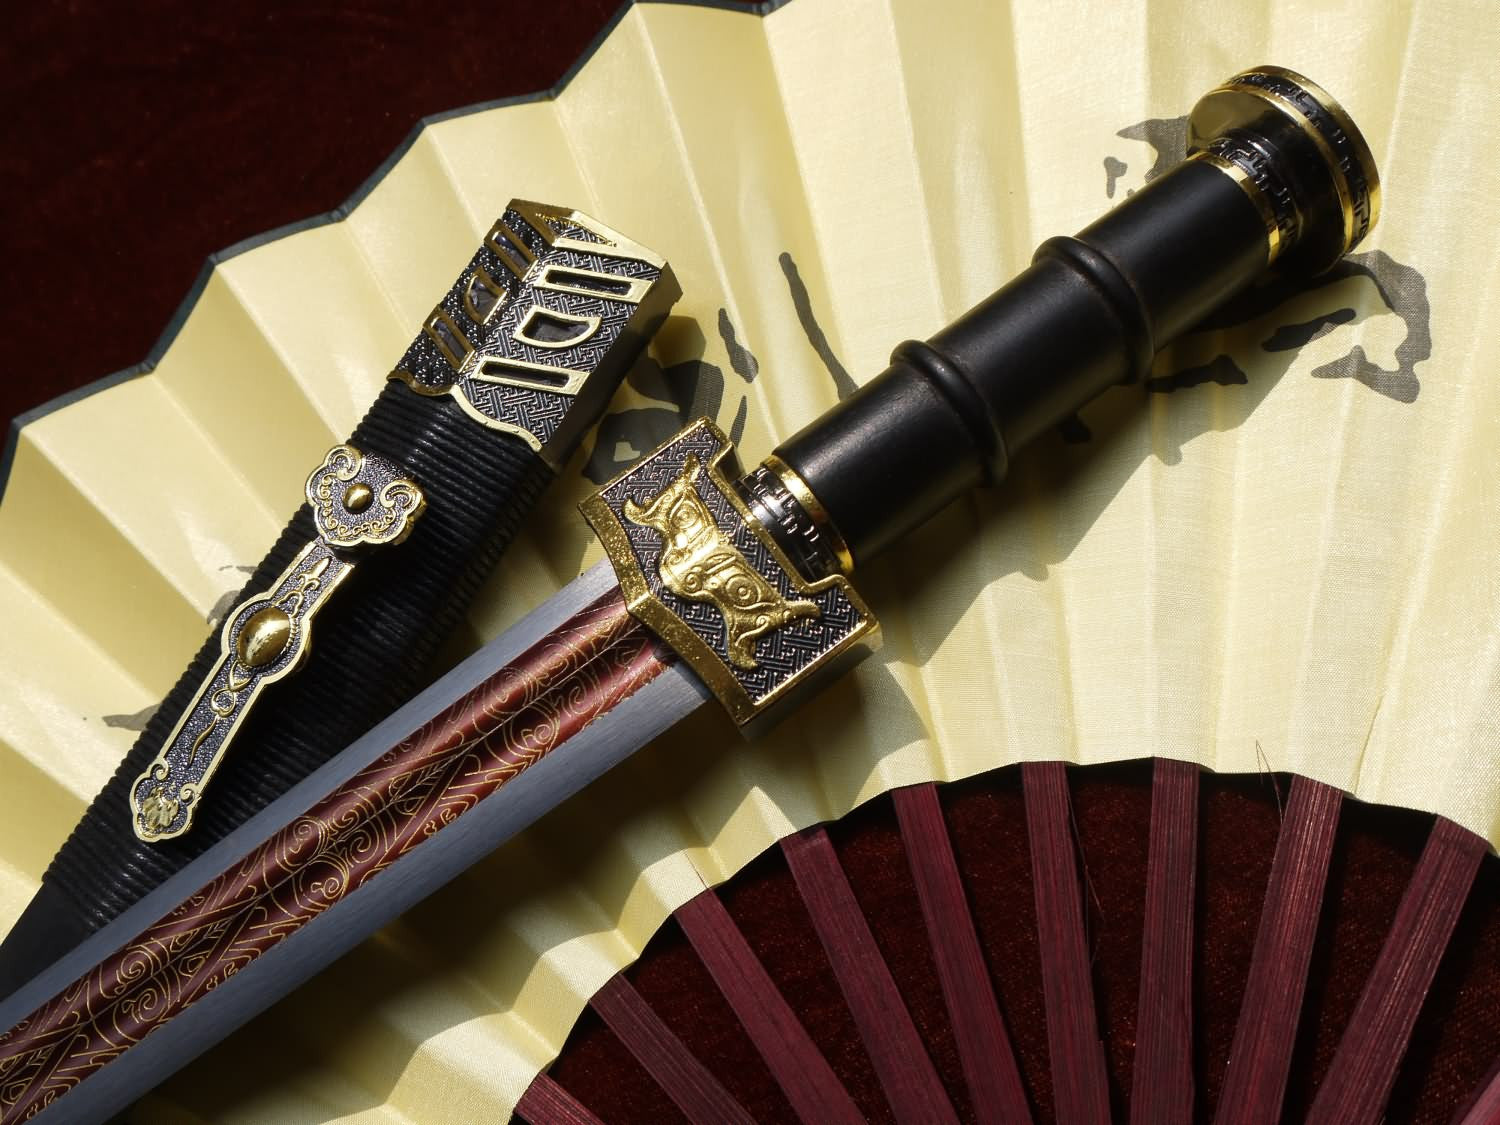 Dagger sword,Folded steel,Black wood scabbard,Alloy fitting,Length 13 inch - Chinese sword shop